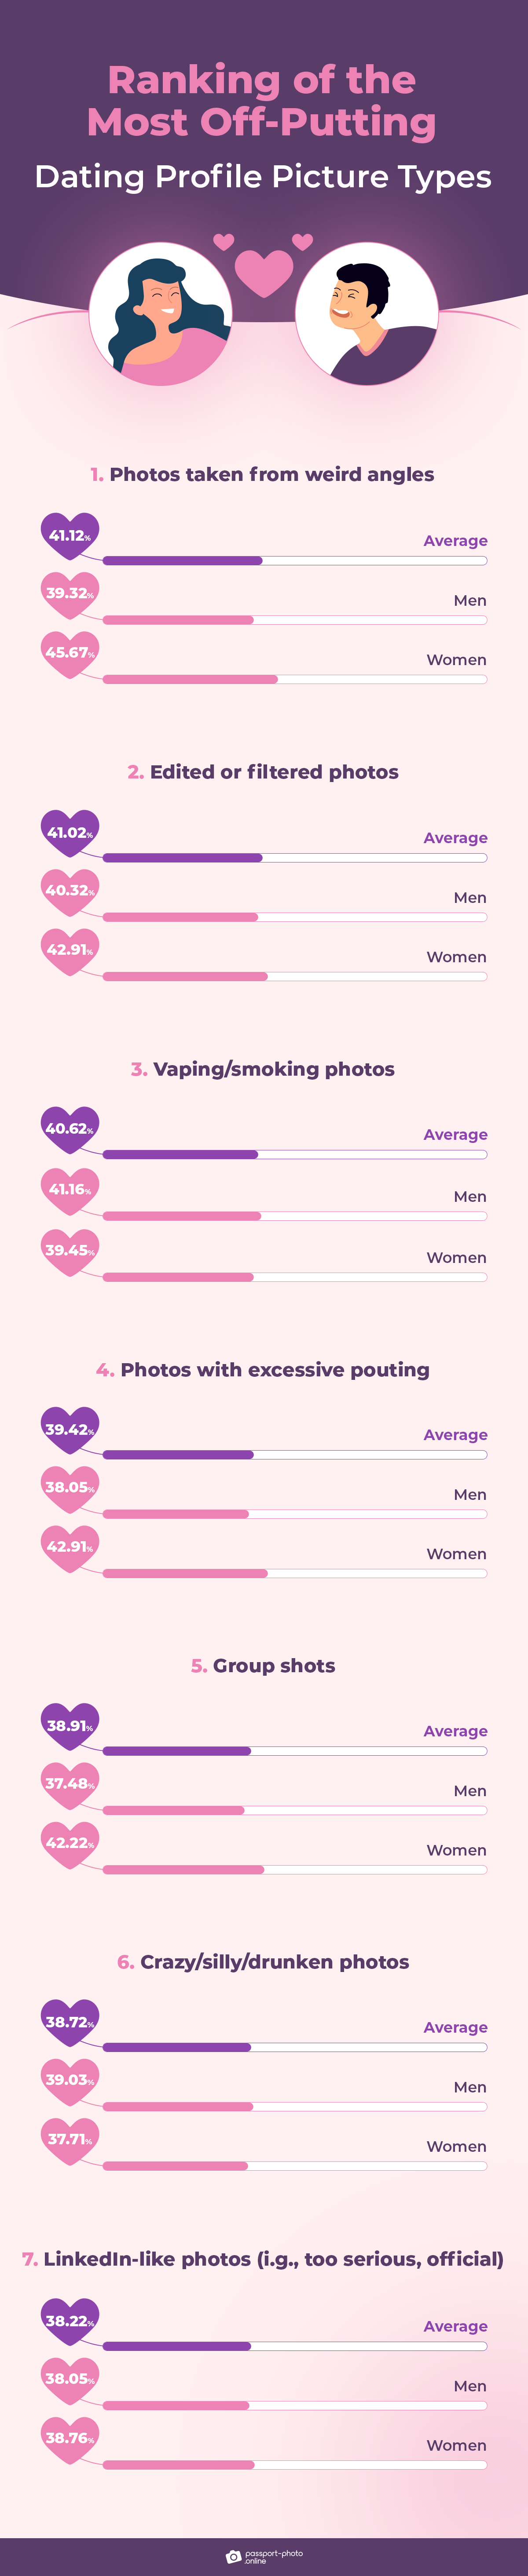 ranking of the most off-putting dating profile photo types